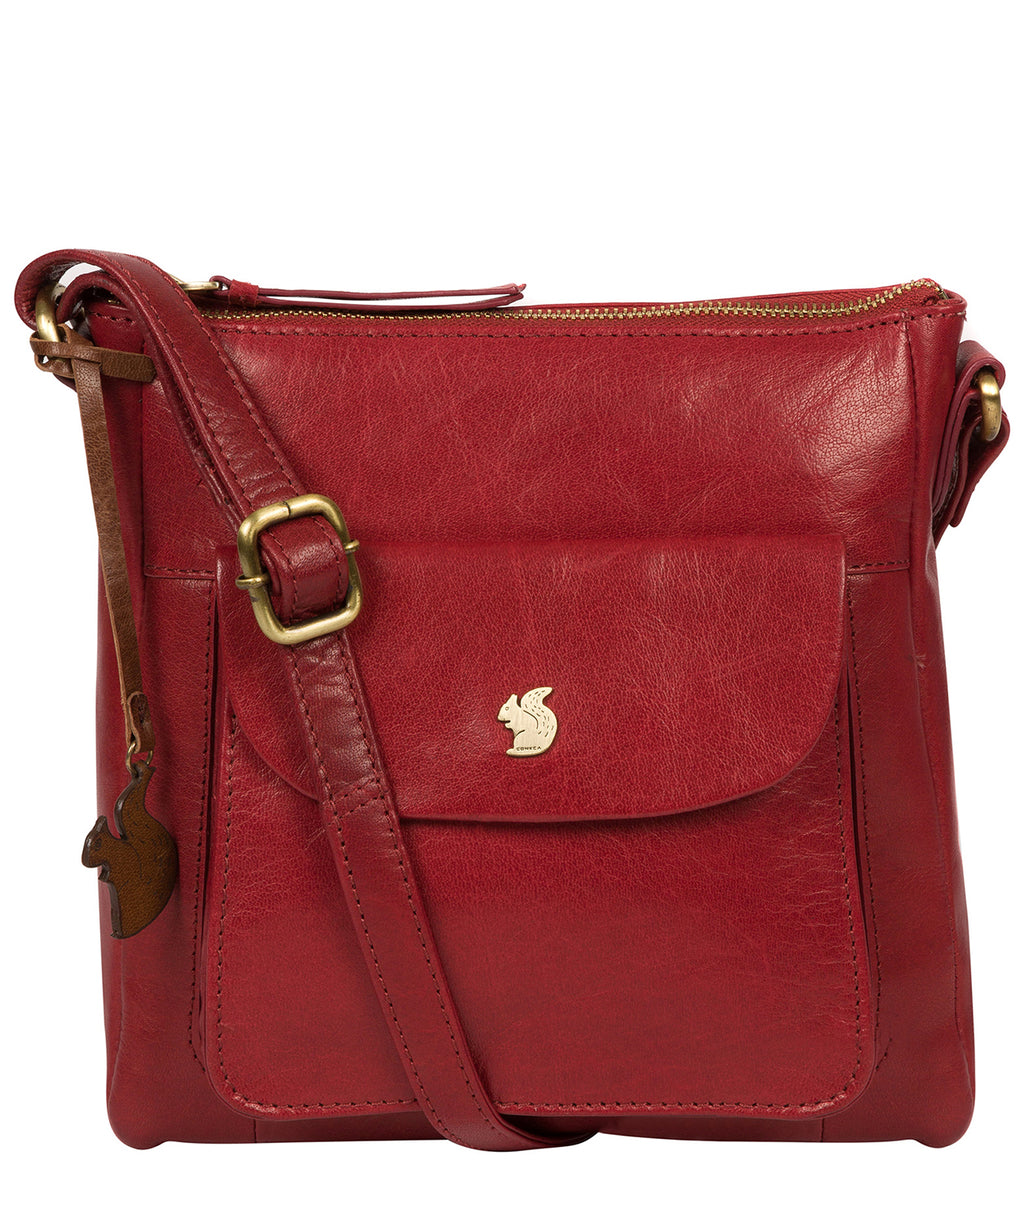 Red Leather Crossbody Bag 'Shona' by Conkca London – Pure Luxuries London